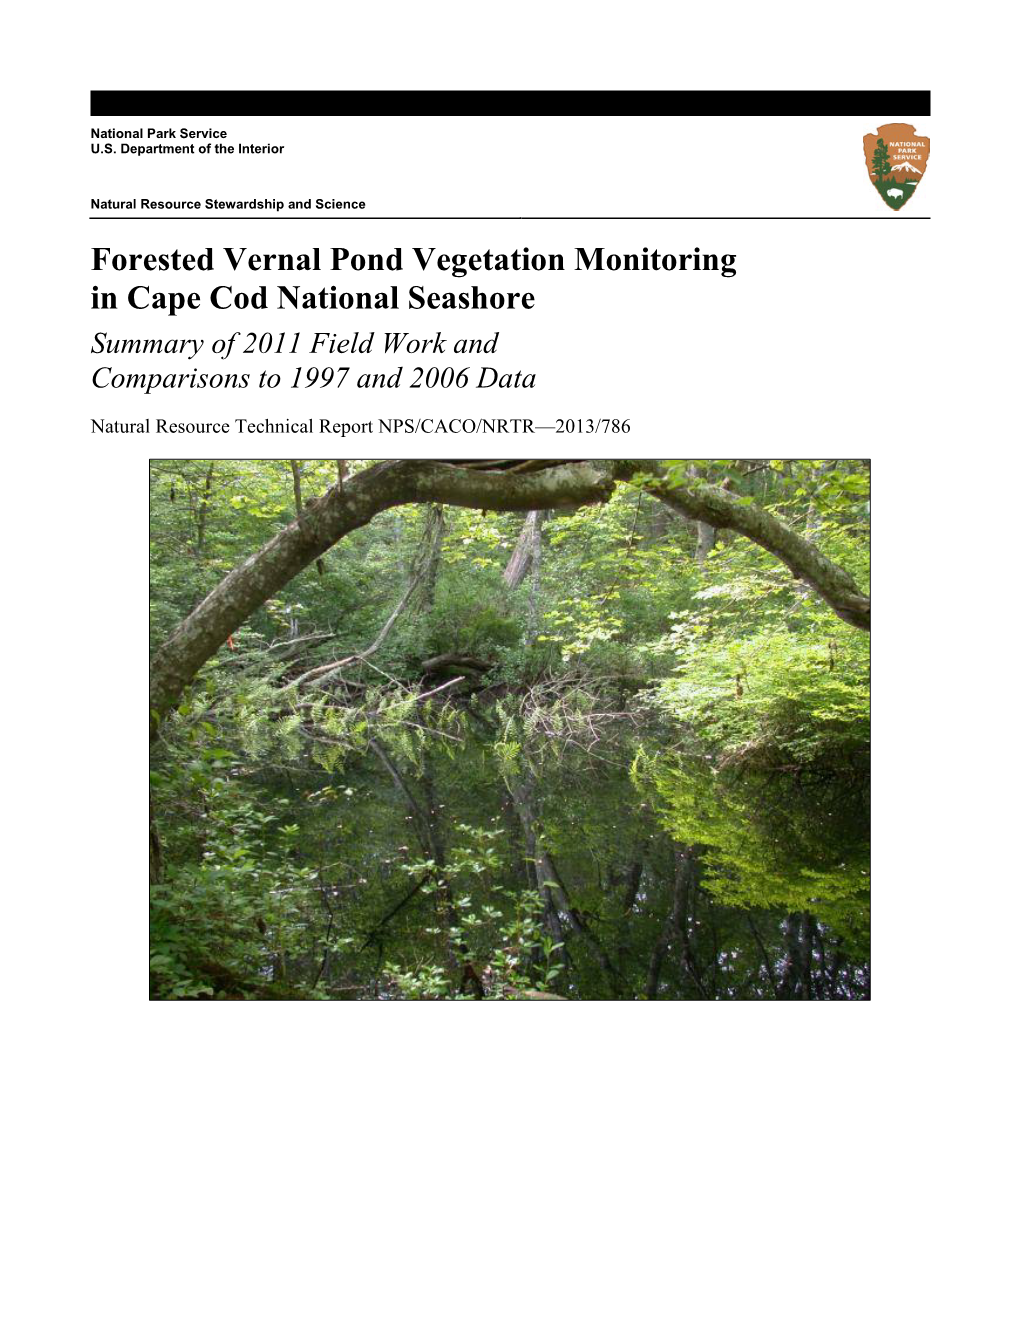 Forested Vernal Pond Vegetation Monitoring in Cape Cod National Seashore Summary of 2011 Field Work and Comparisons to 1997 and 2006 Data